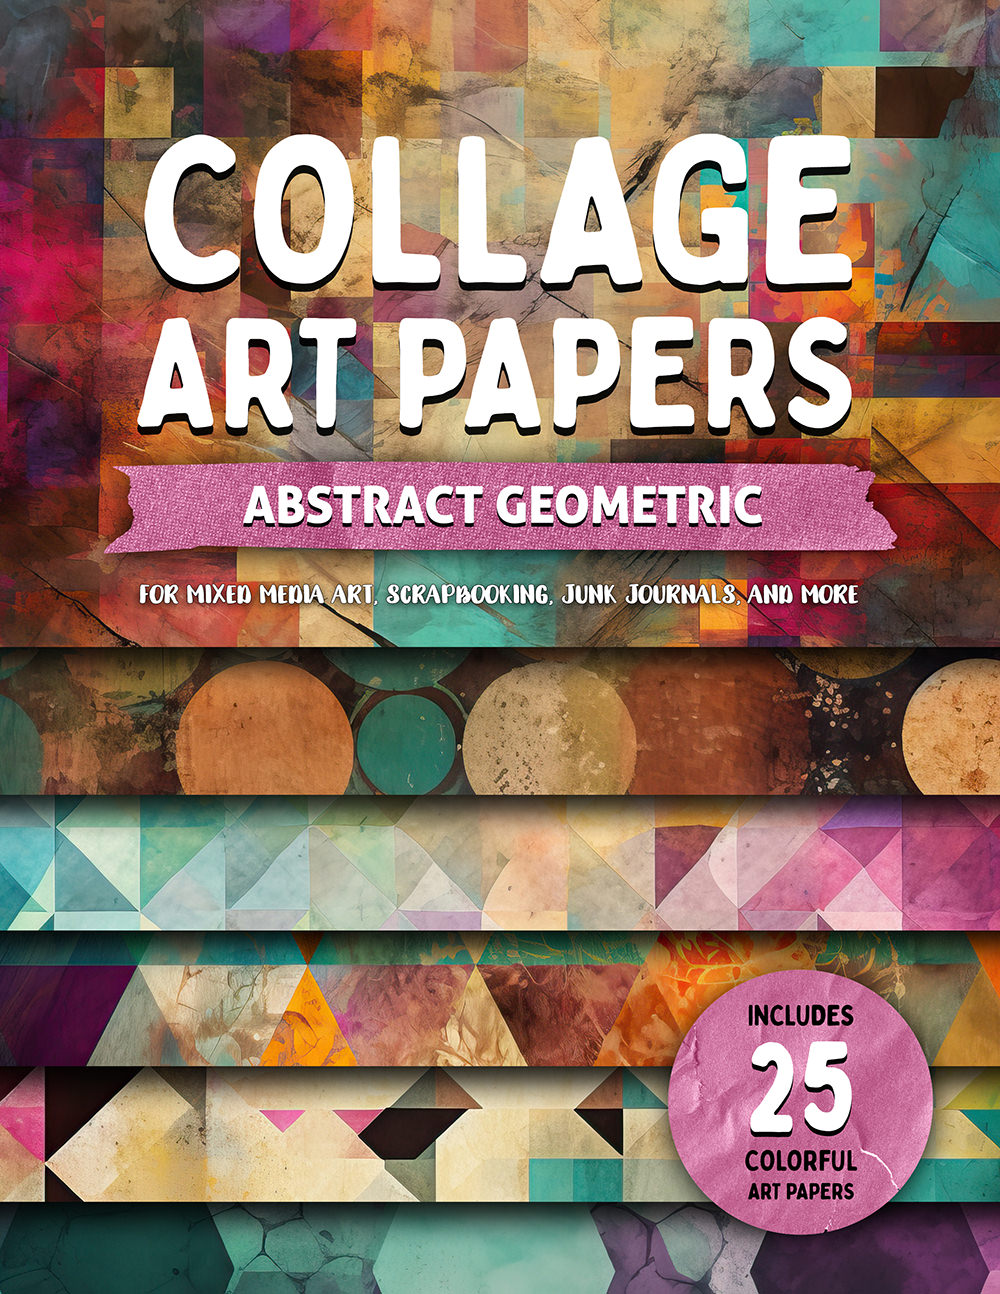 Collage Art Papers: Abstract Geometric